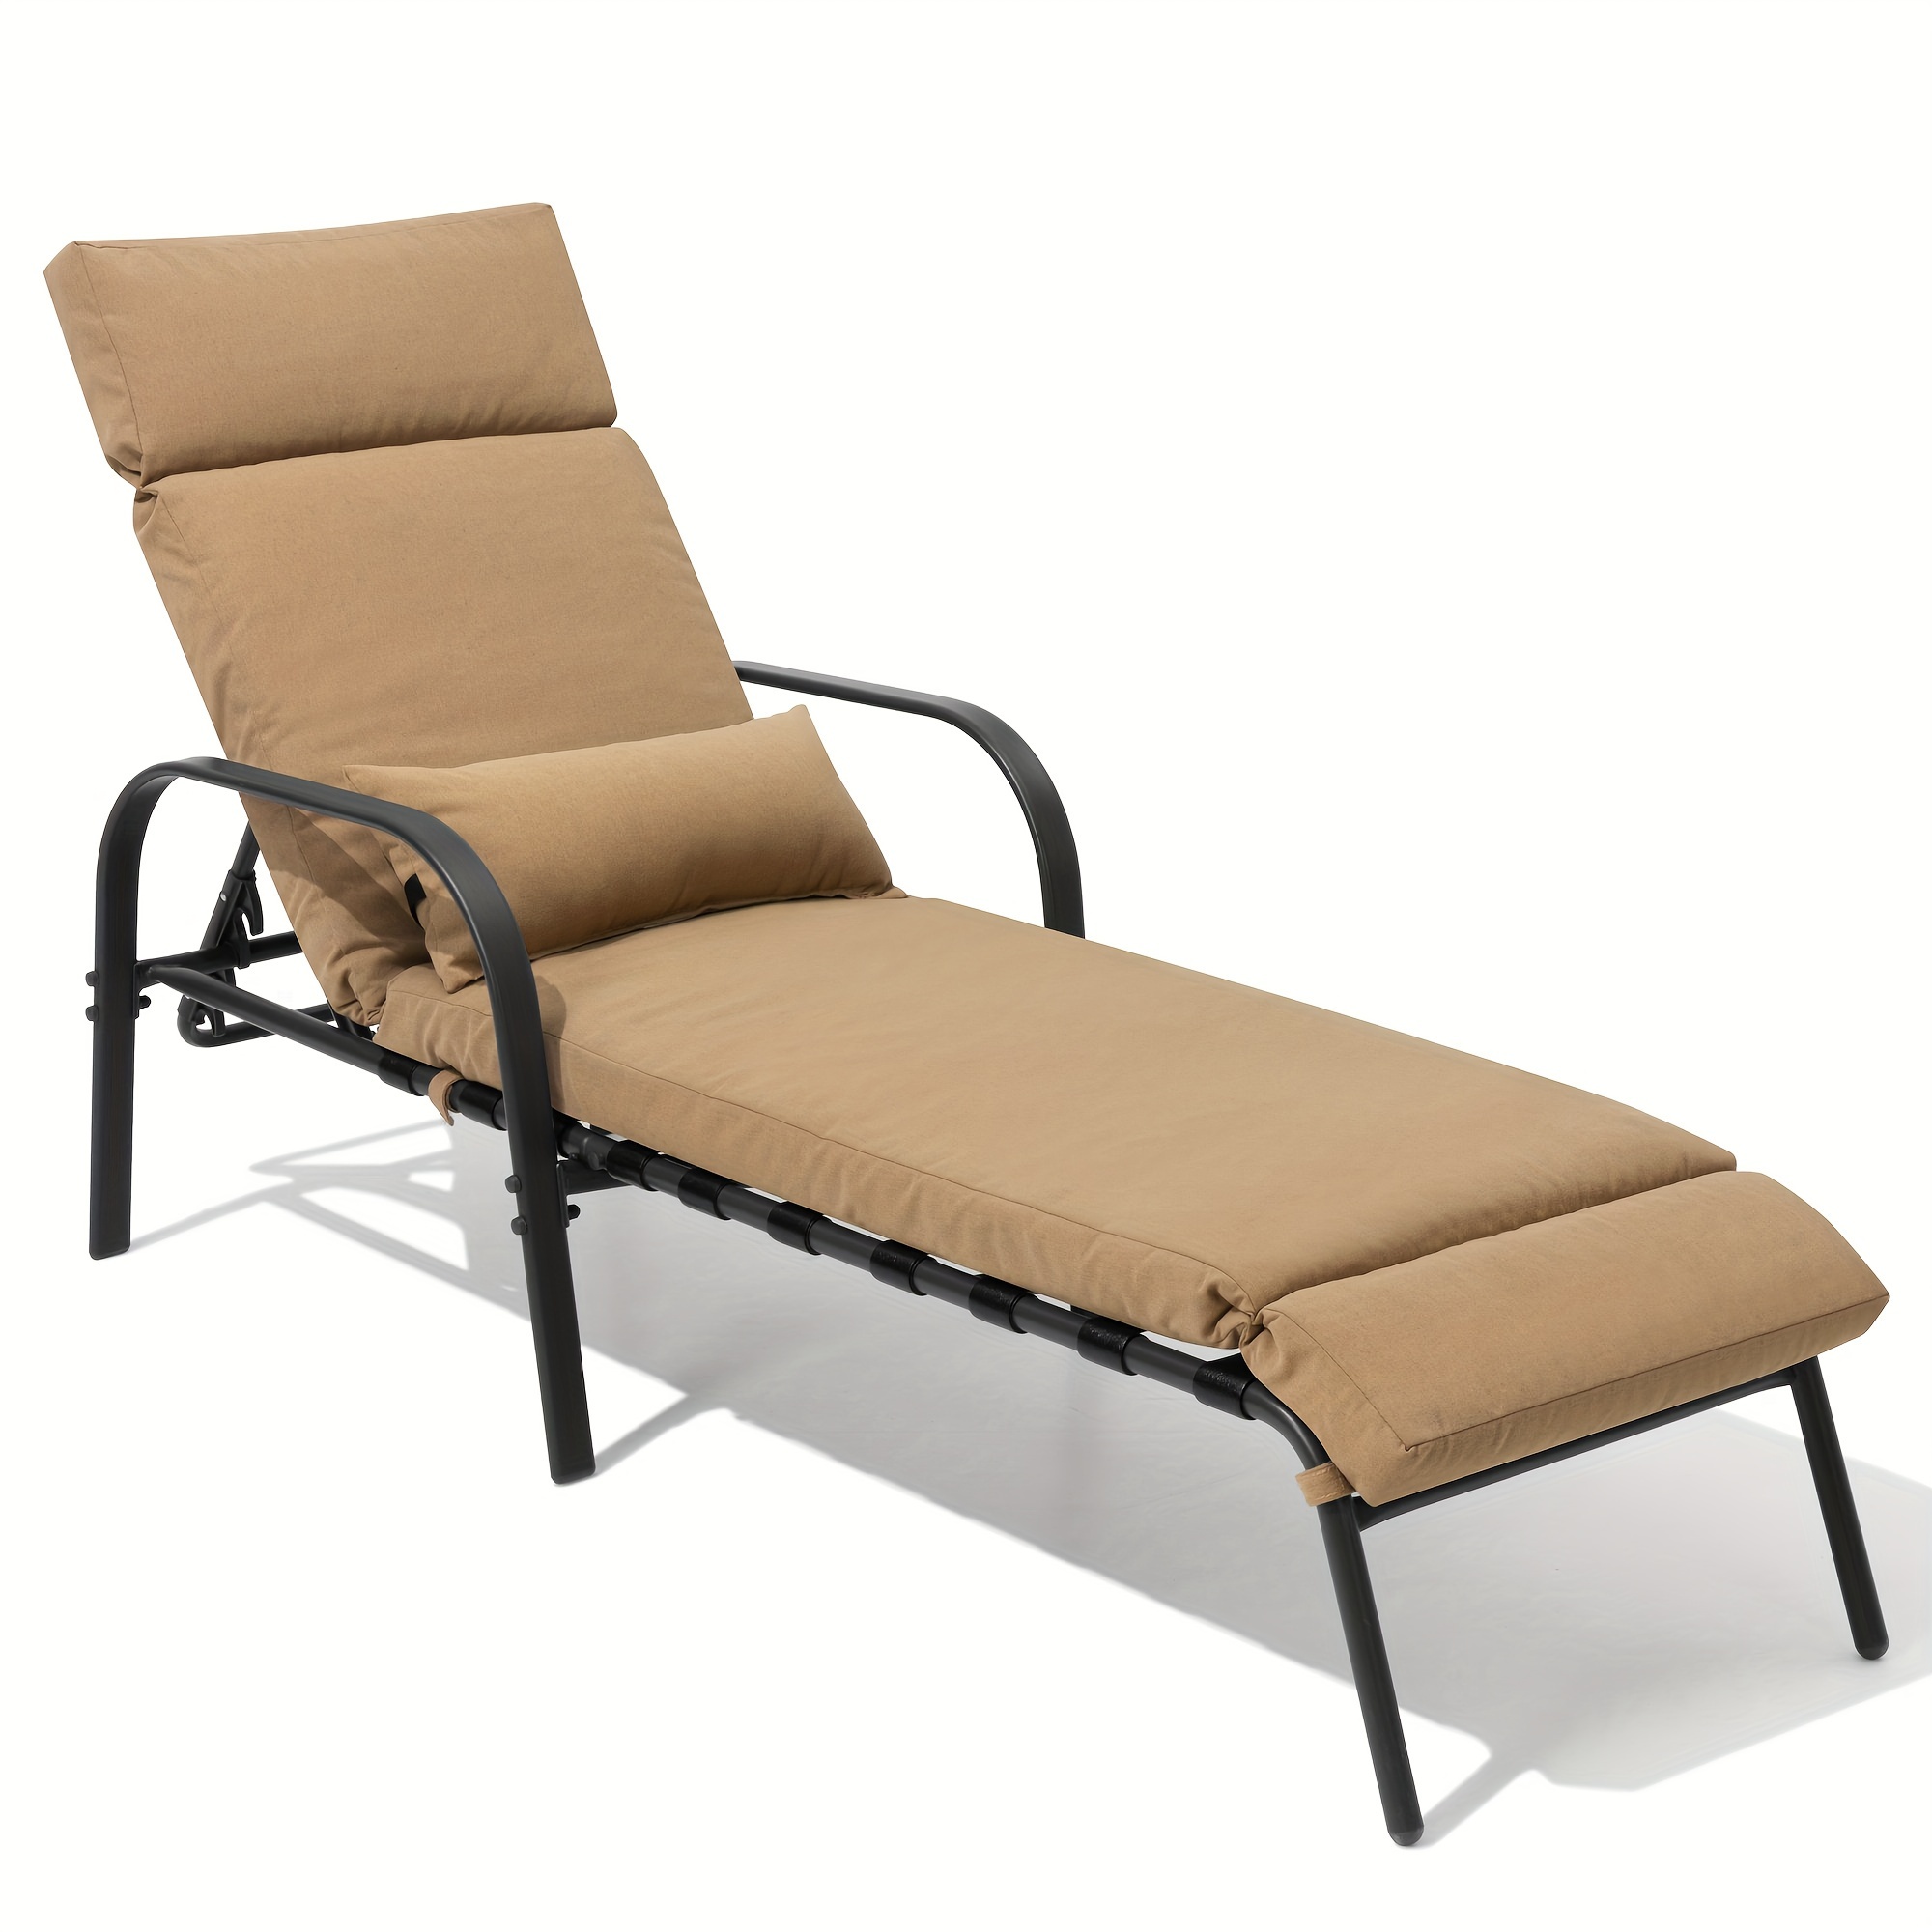 

1 Pc Adjustable Chaise Lounge Chair With Cushion & Pillow, Outdoor Five-position Recliner, All Weather For Patio, Beach, Yard, Pool